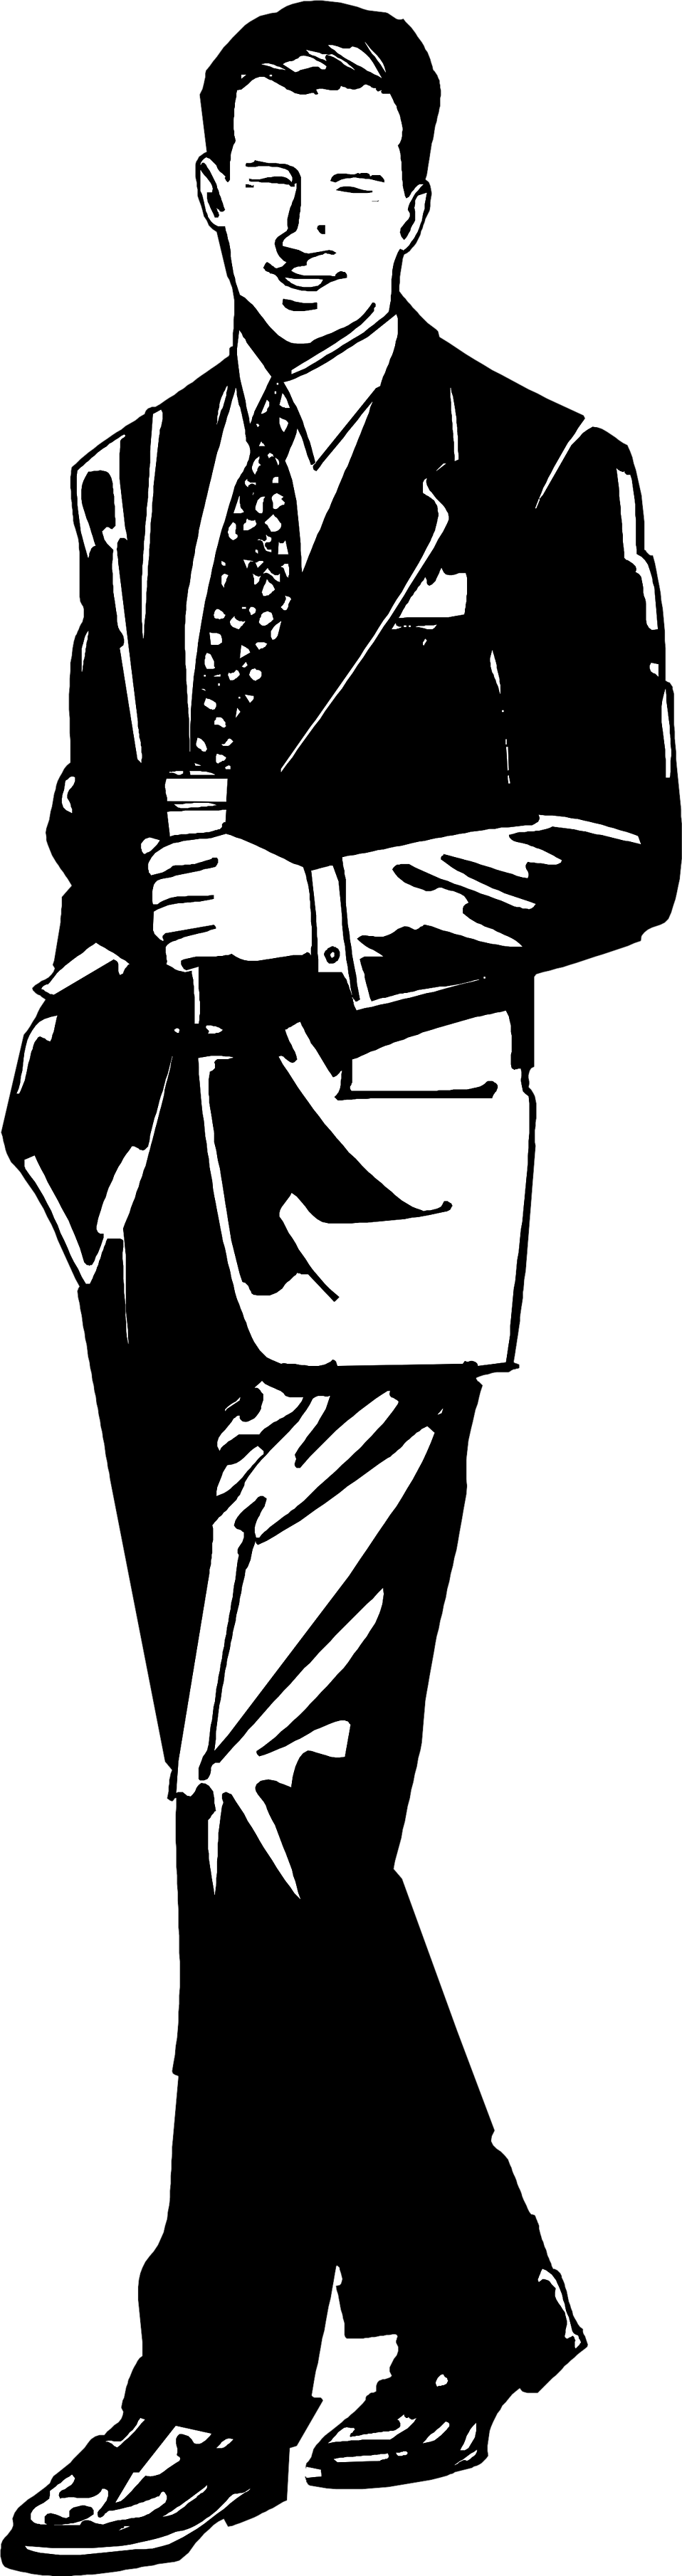 man in suit clipart - photo #45